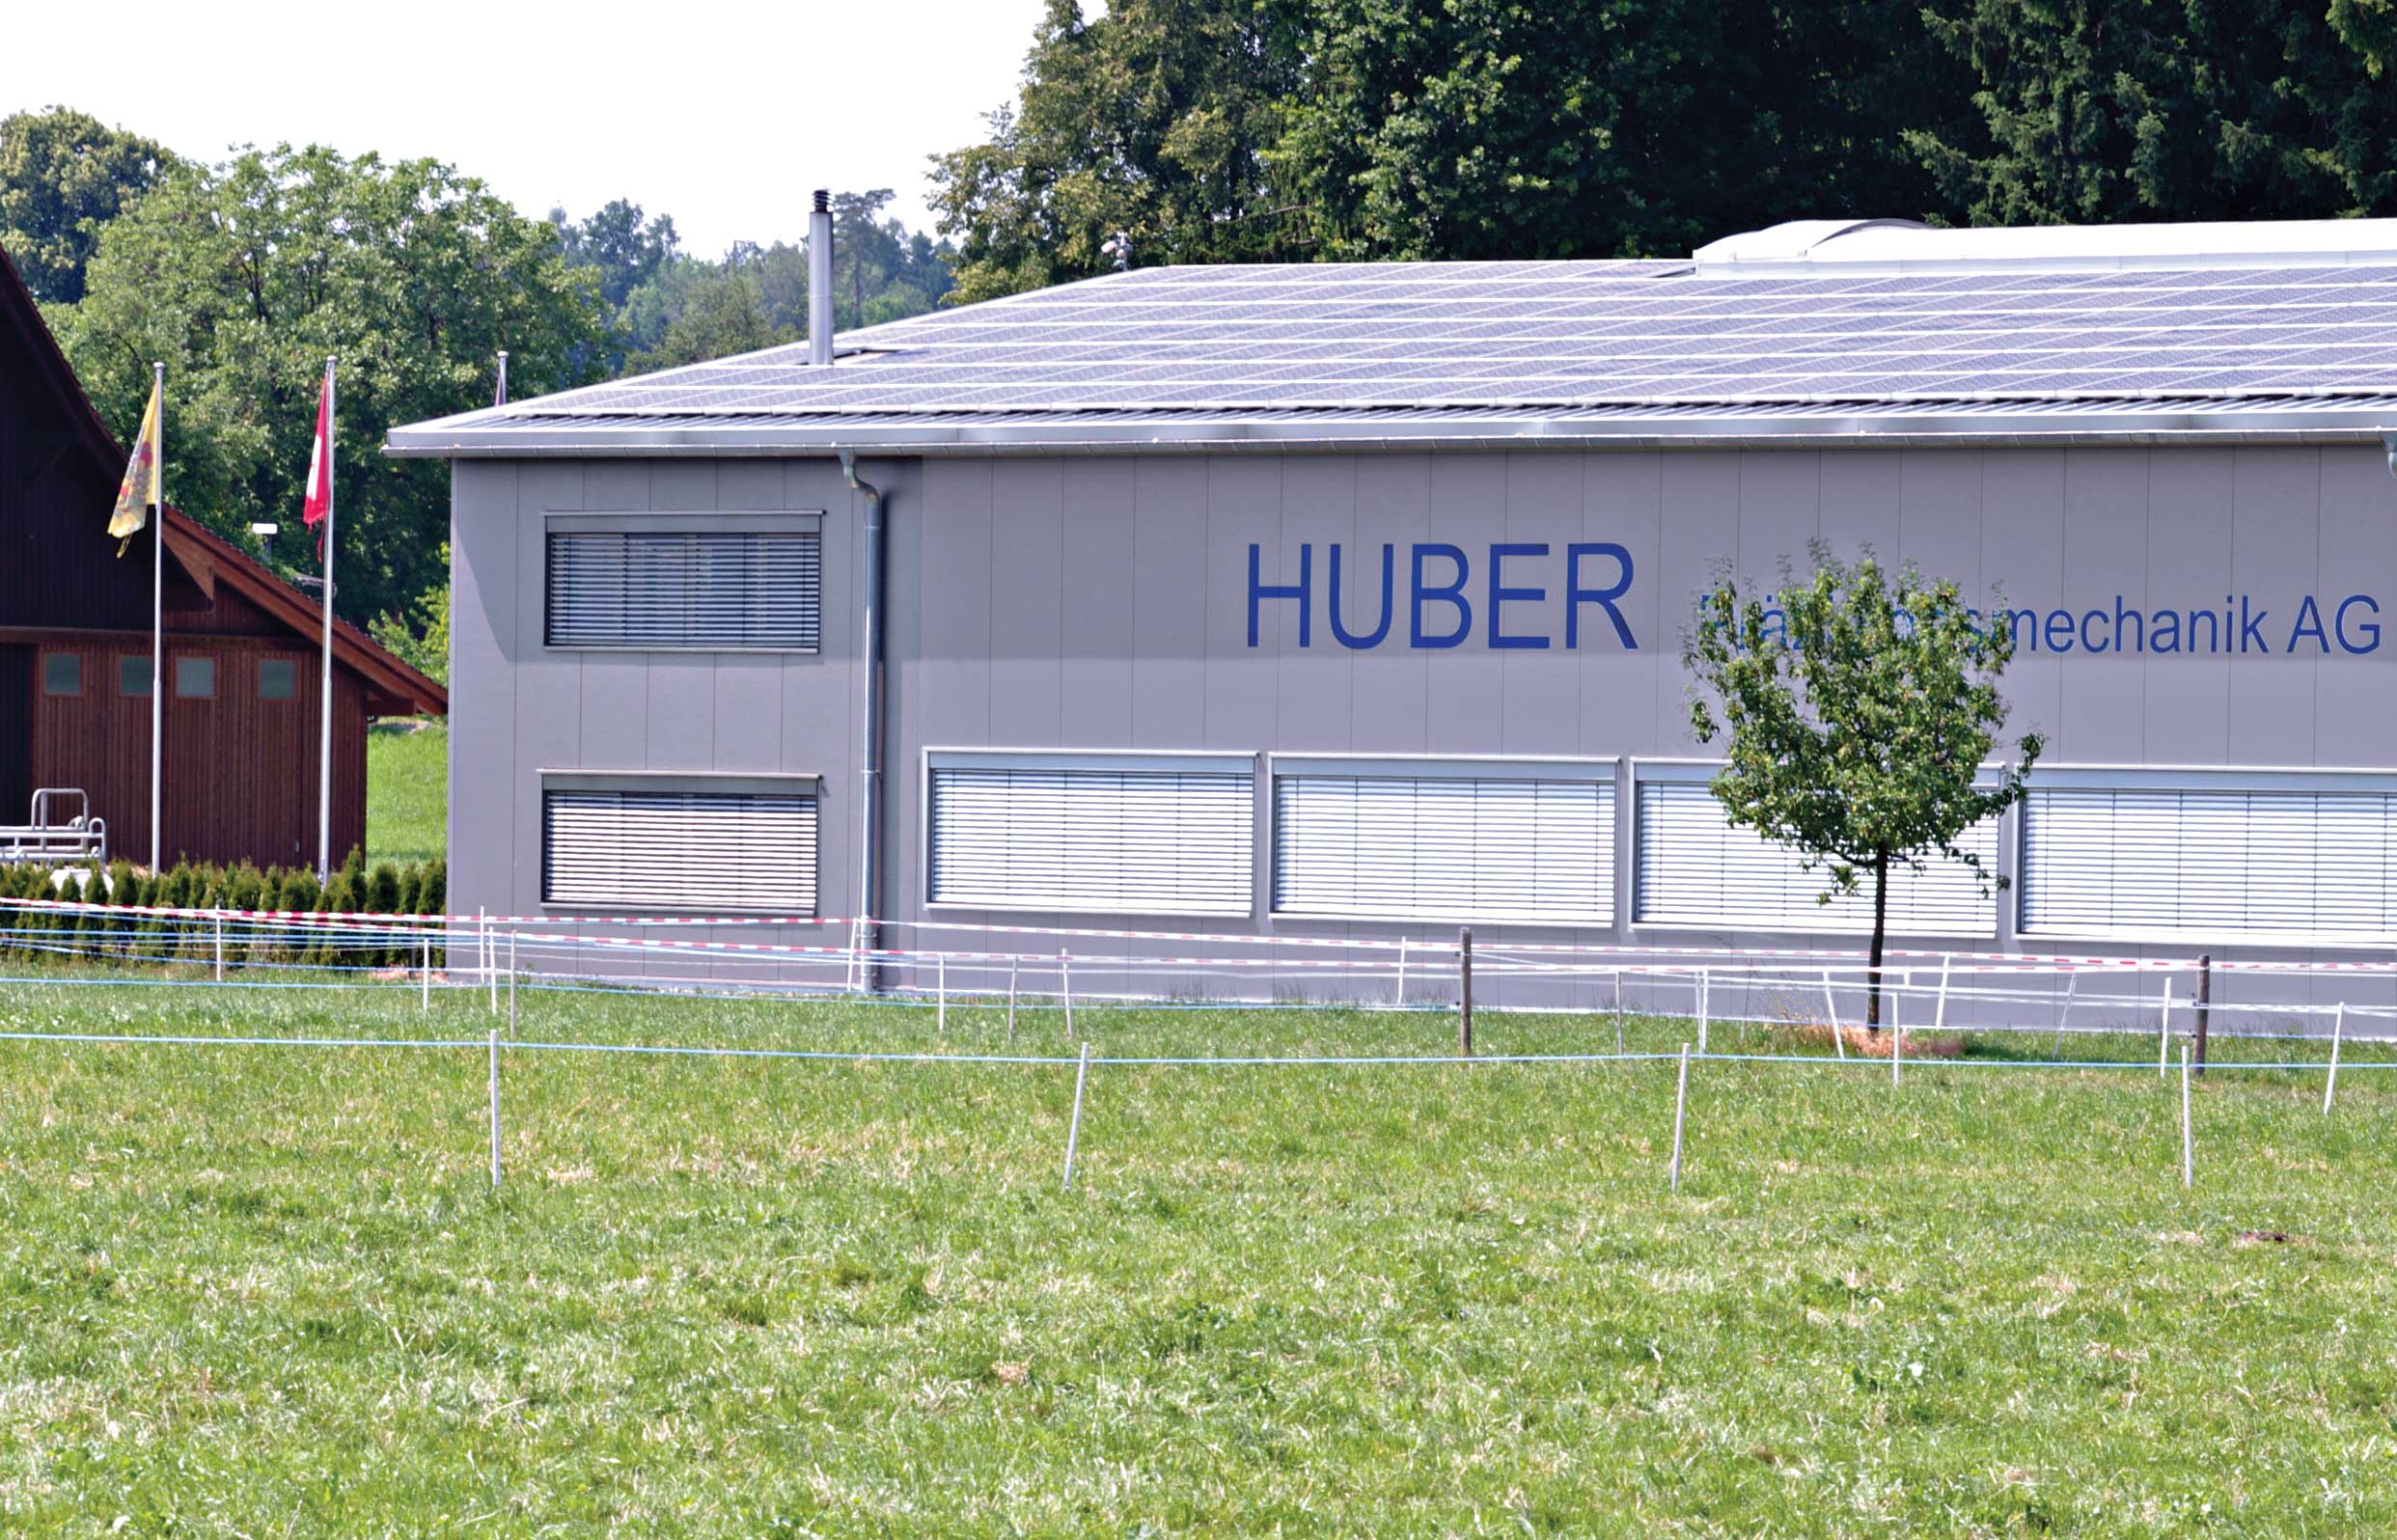 Reconciling technology and nature, the Huber family now intends to meet the power requirements of its production shop with a battery-buffered solar cell installation. 